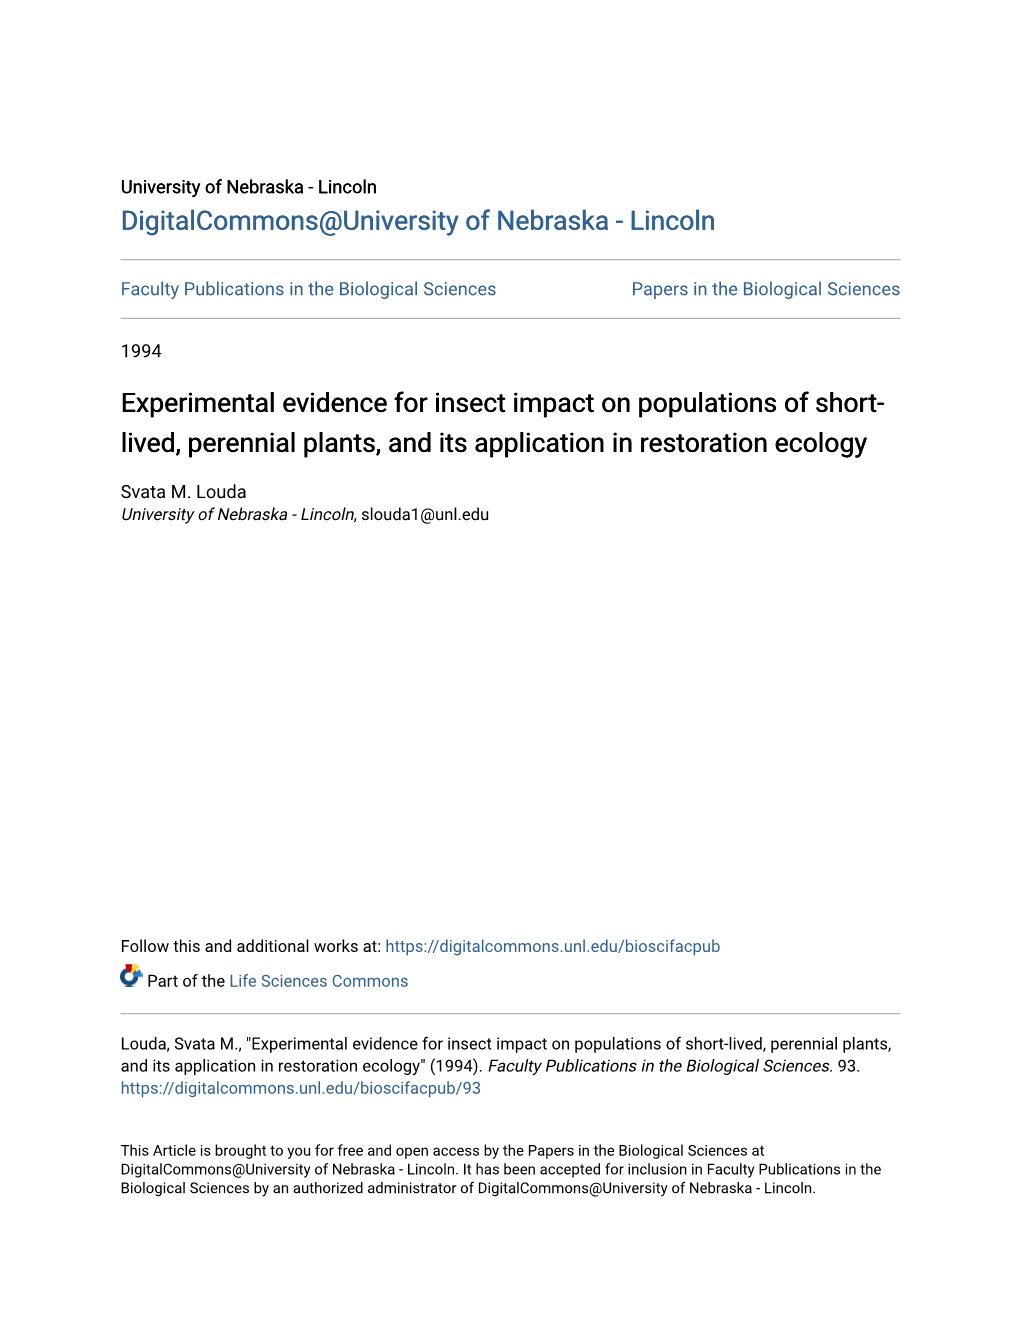 Experimental Evidence for Insect Impact on Populations of Short-Lived, Perennial Plants, and Its Application in Restoration Ecology" (1994)